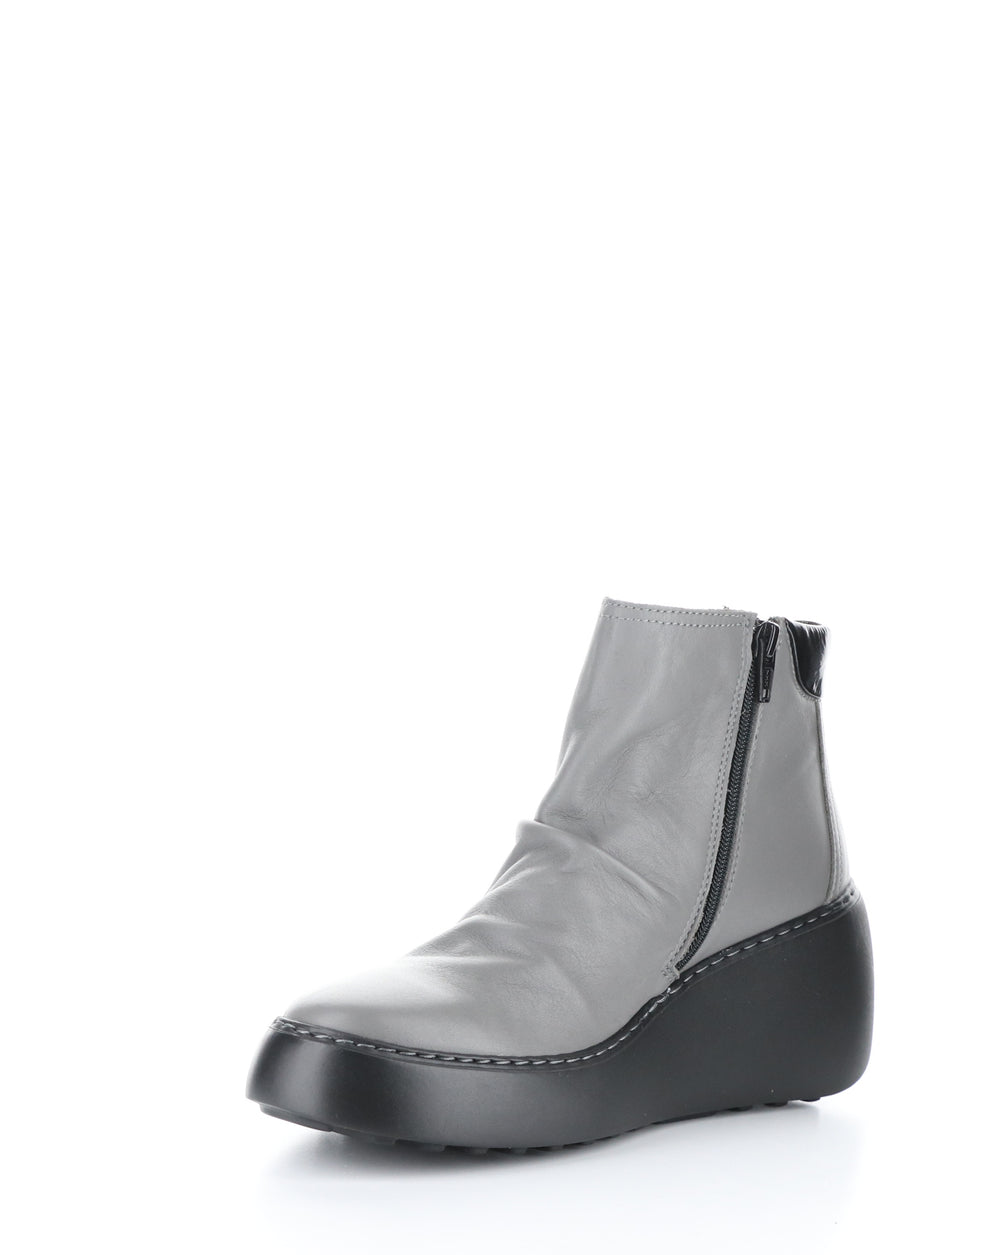 DABE461FLY 007 GREY Round Toe Boots